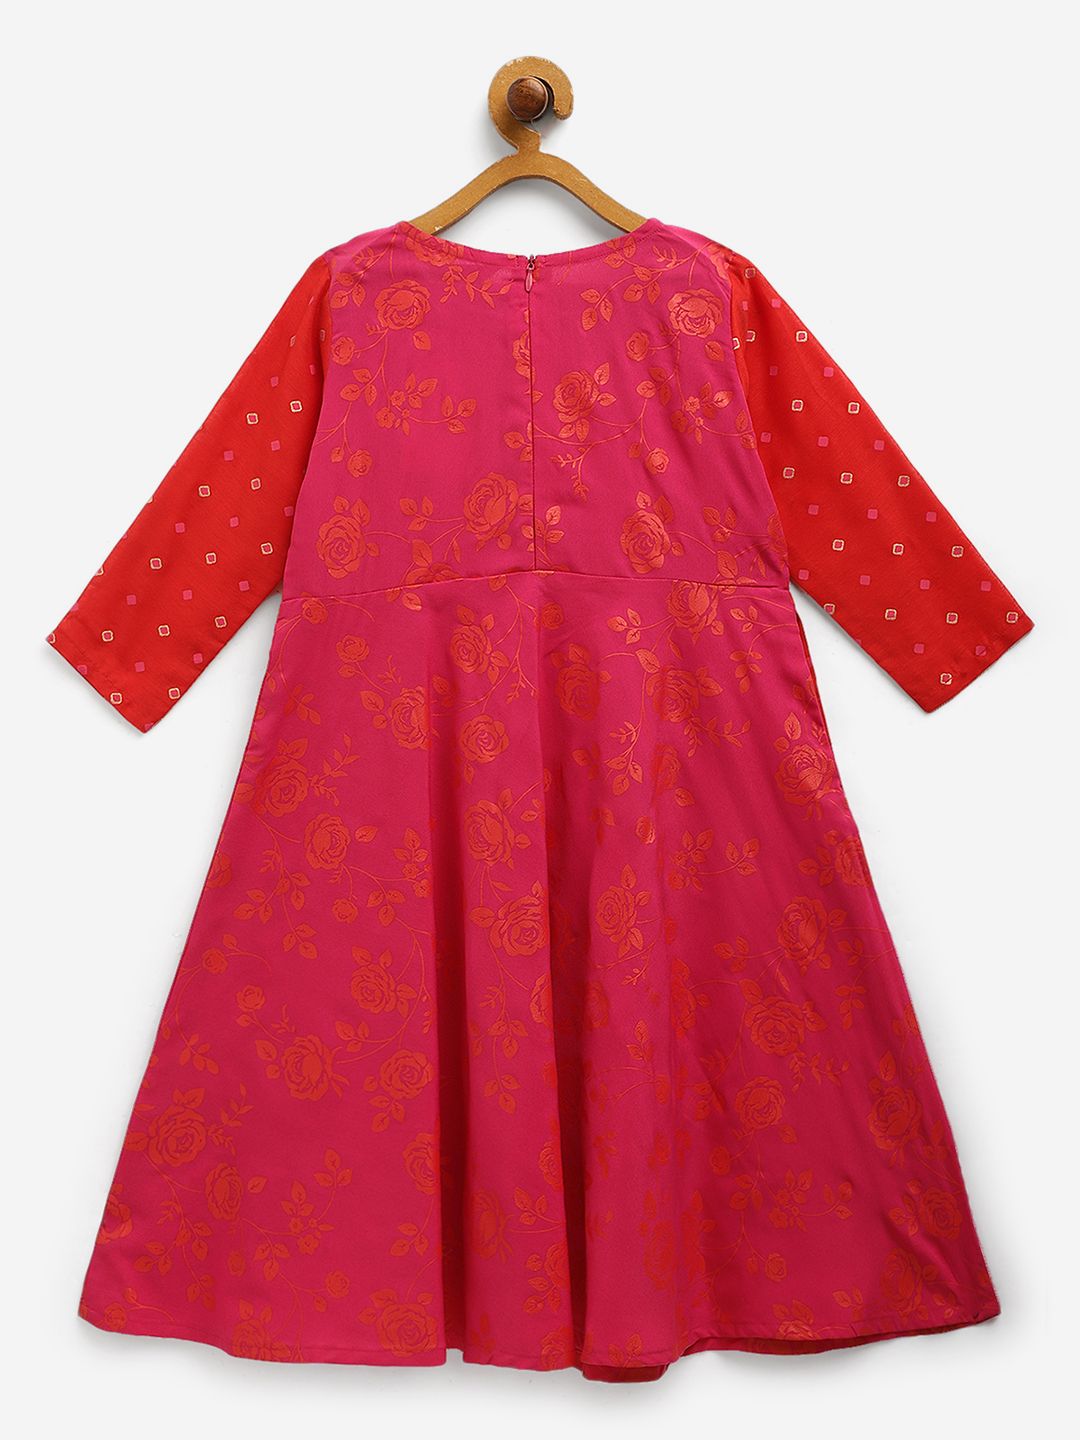 Dark Pink Crepe Printed Girls Dress with Attached Jacket